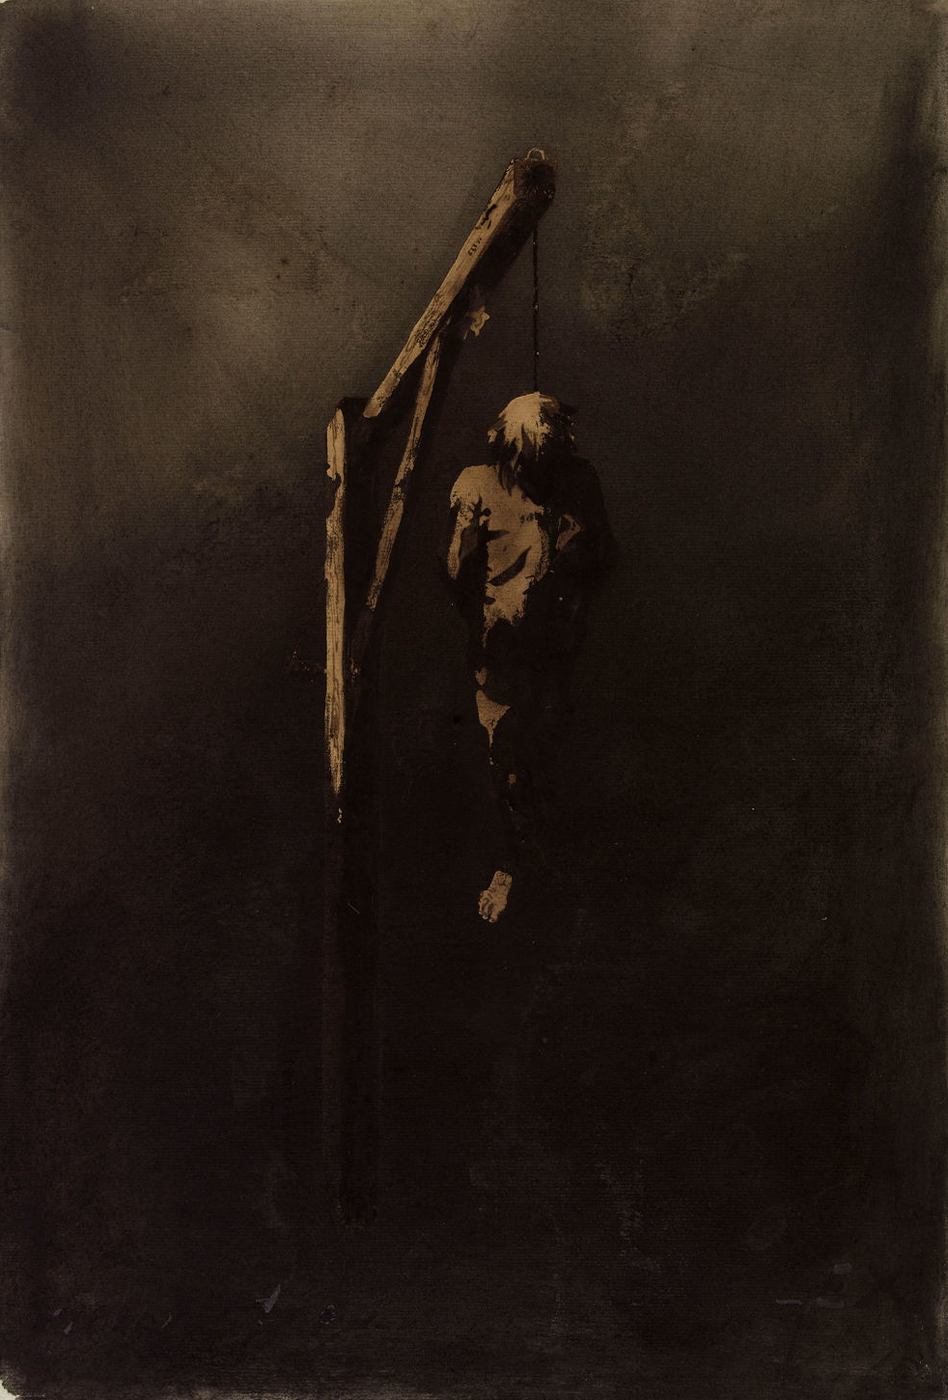 File:Victor Hugo, Hanged Man (1854), ink wash, graphite, charcoal, and  gouache on paper, 50.8 × 34.9 cm., Maisons de Victor Hugo, Paris.jpg -  Wikimedia Commons